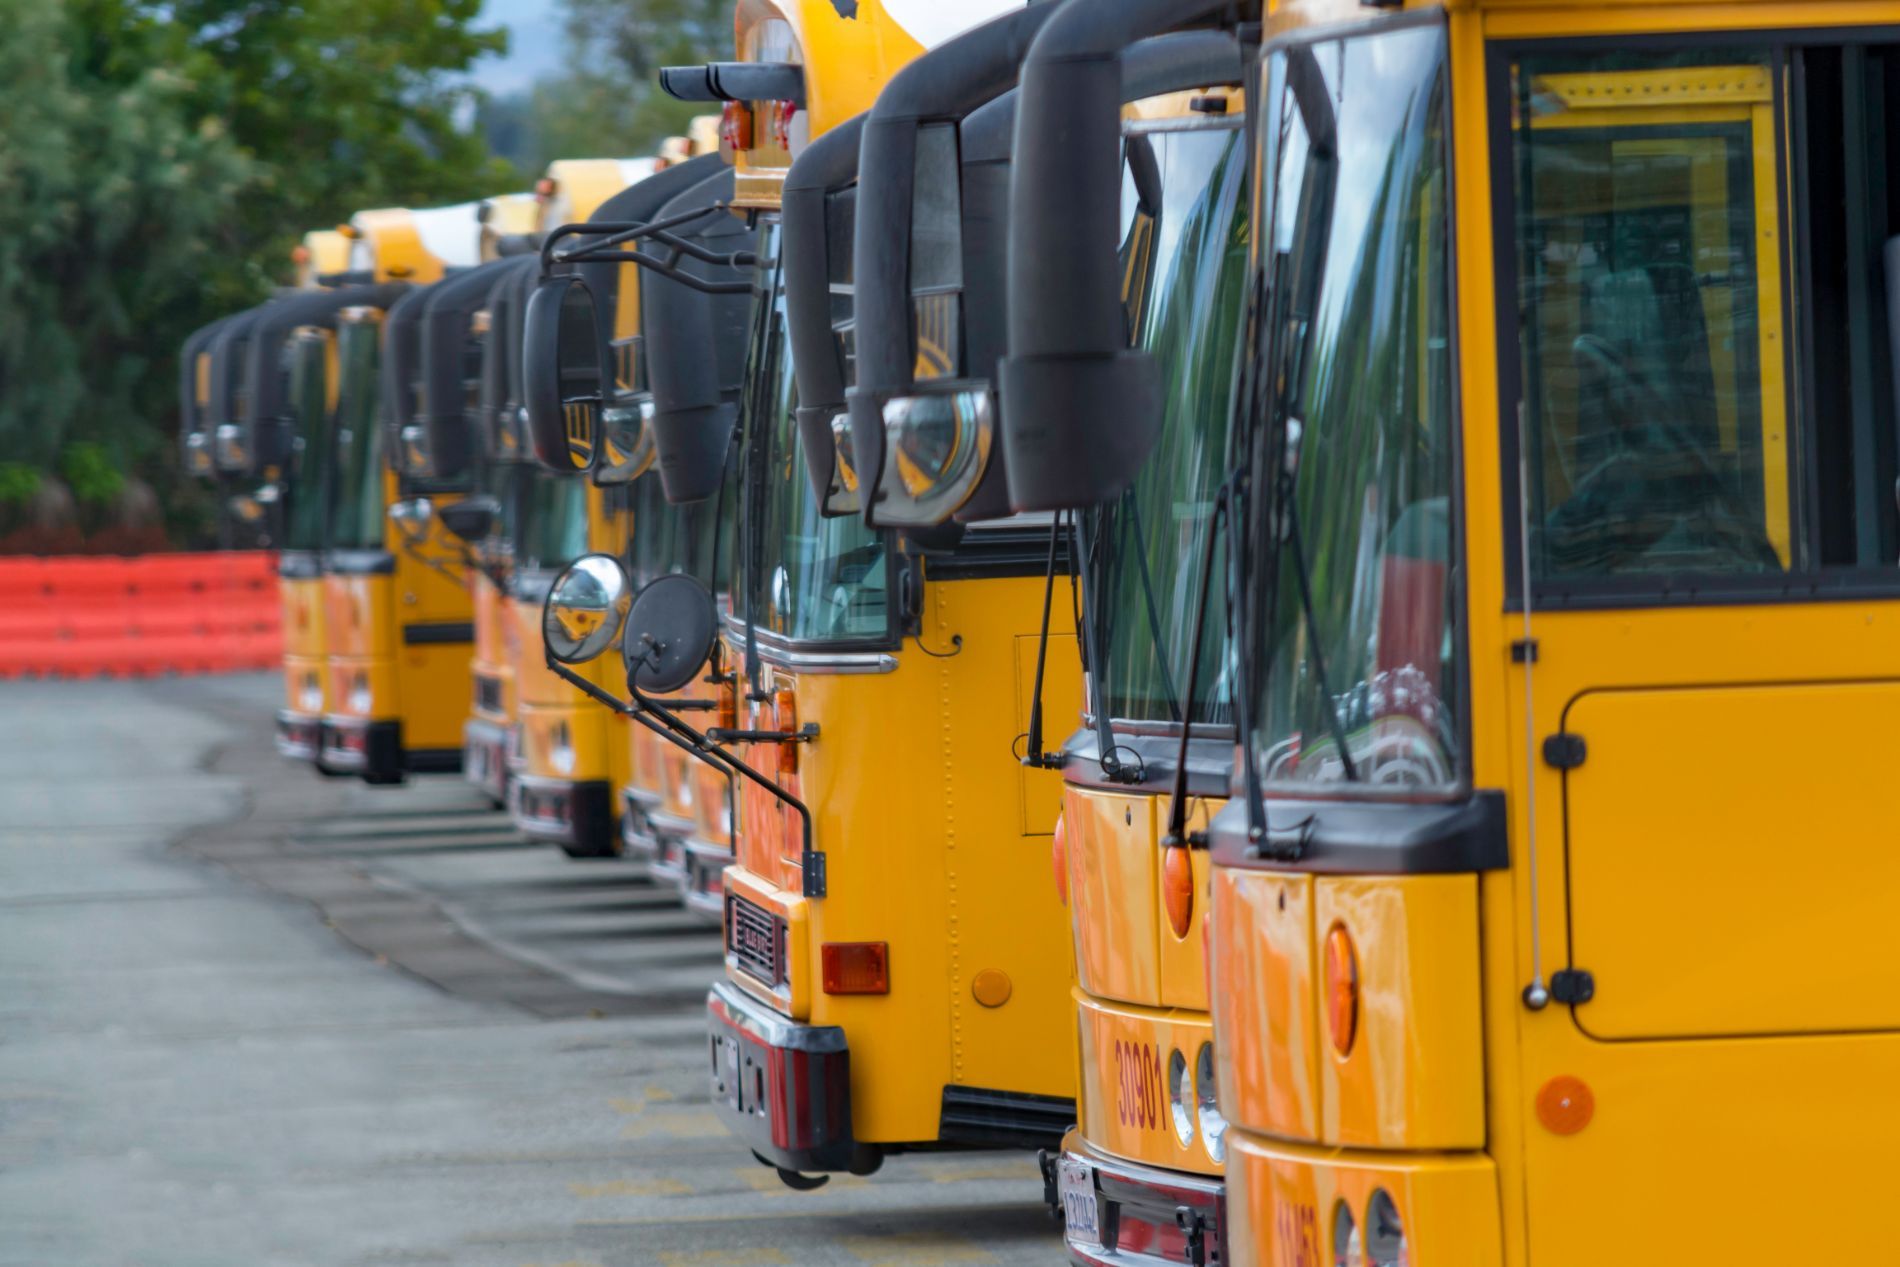 Yellow buses lined up